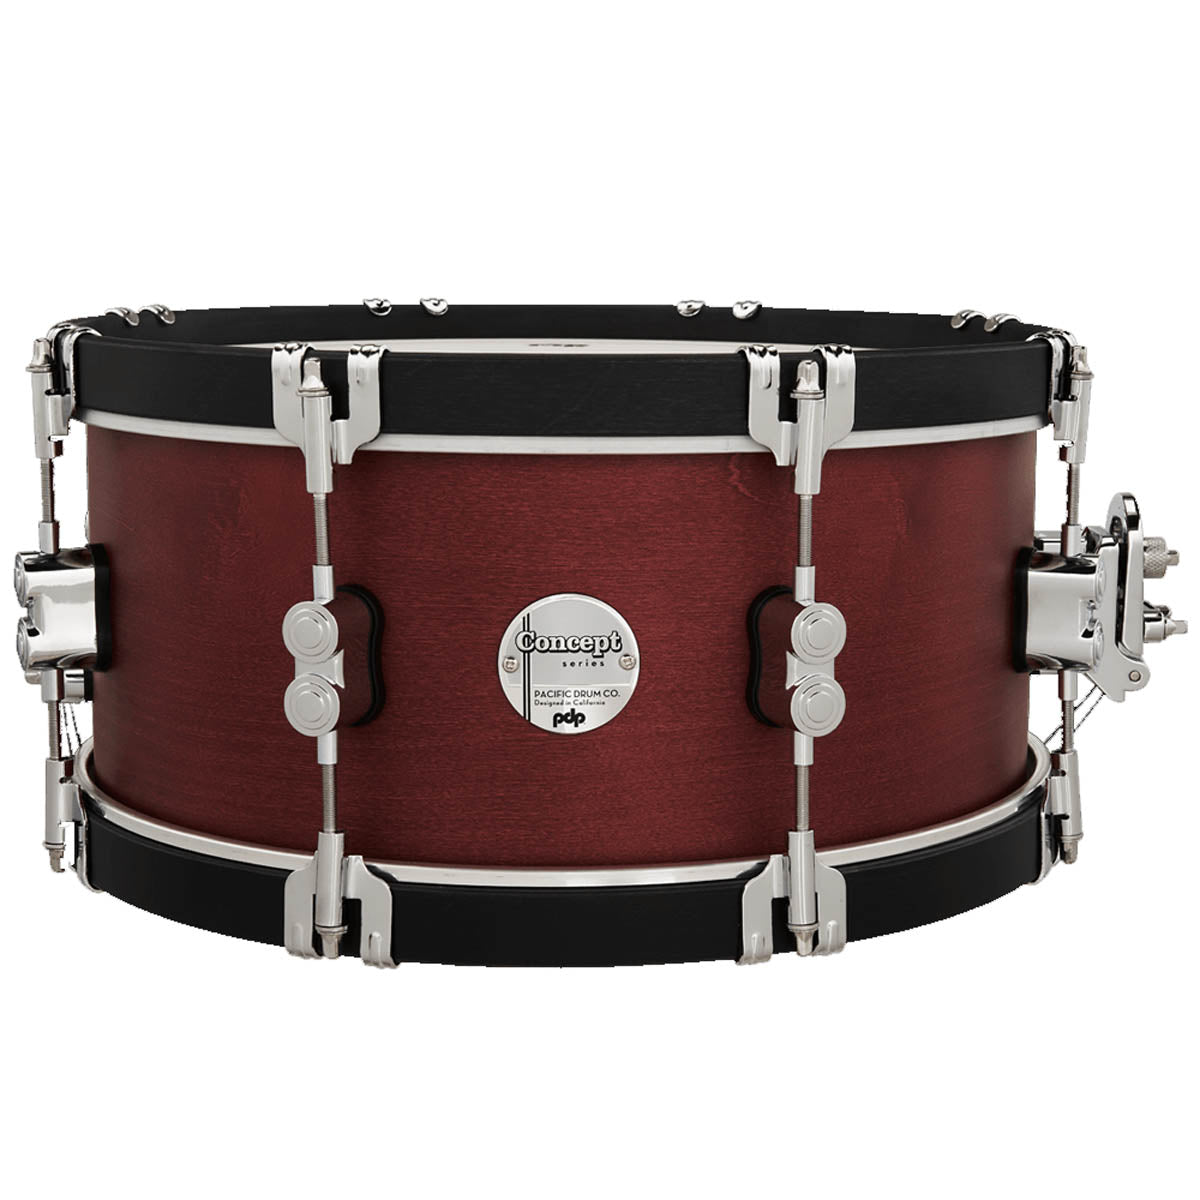 PDP by DW Concept Classic 14"x6.5" Snare Drum with Wood Hoops in Ox Blood